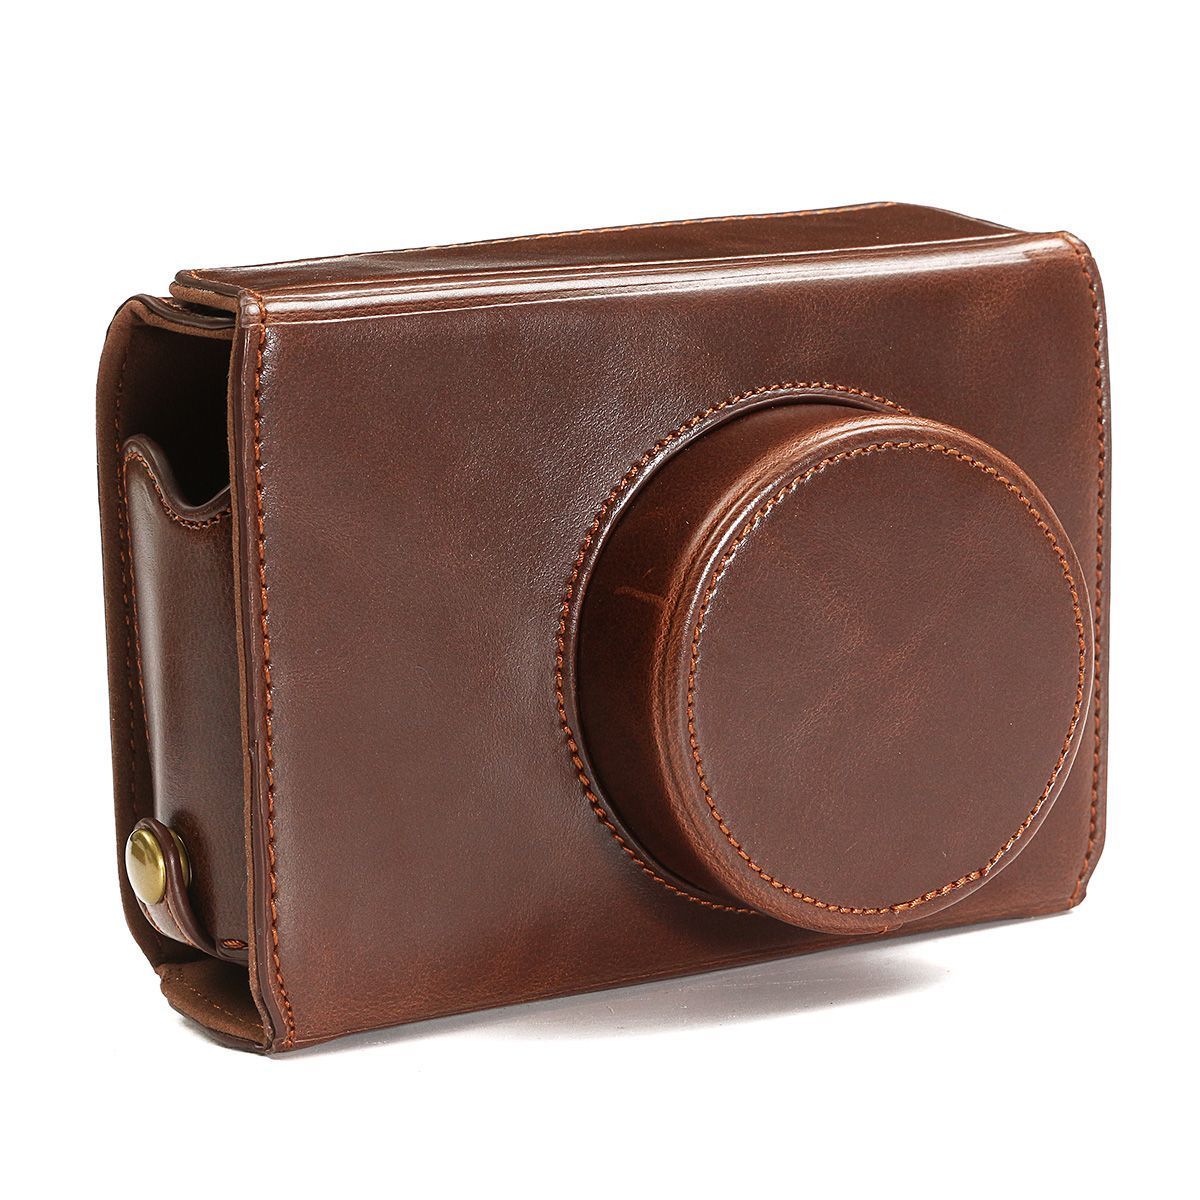 Camera-Leather-Bag-Cover-Case-Bottom-Opening-for-Fujifilm-x100-x100s-x100m-x100t-1108617